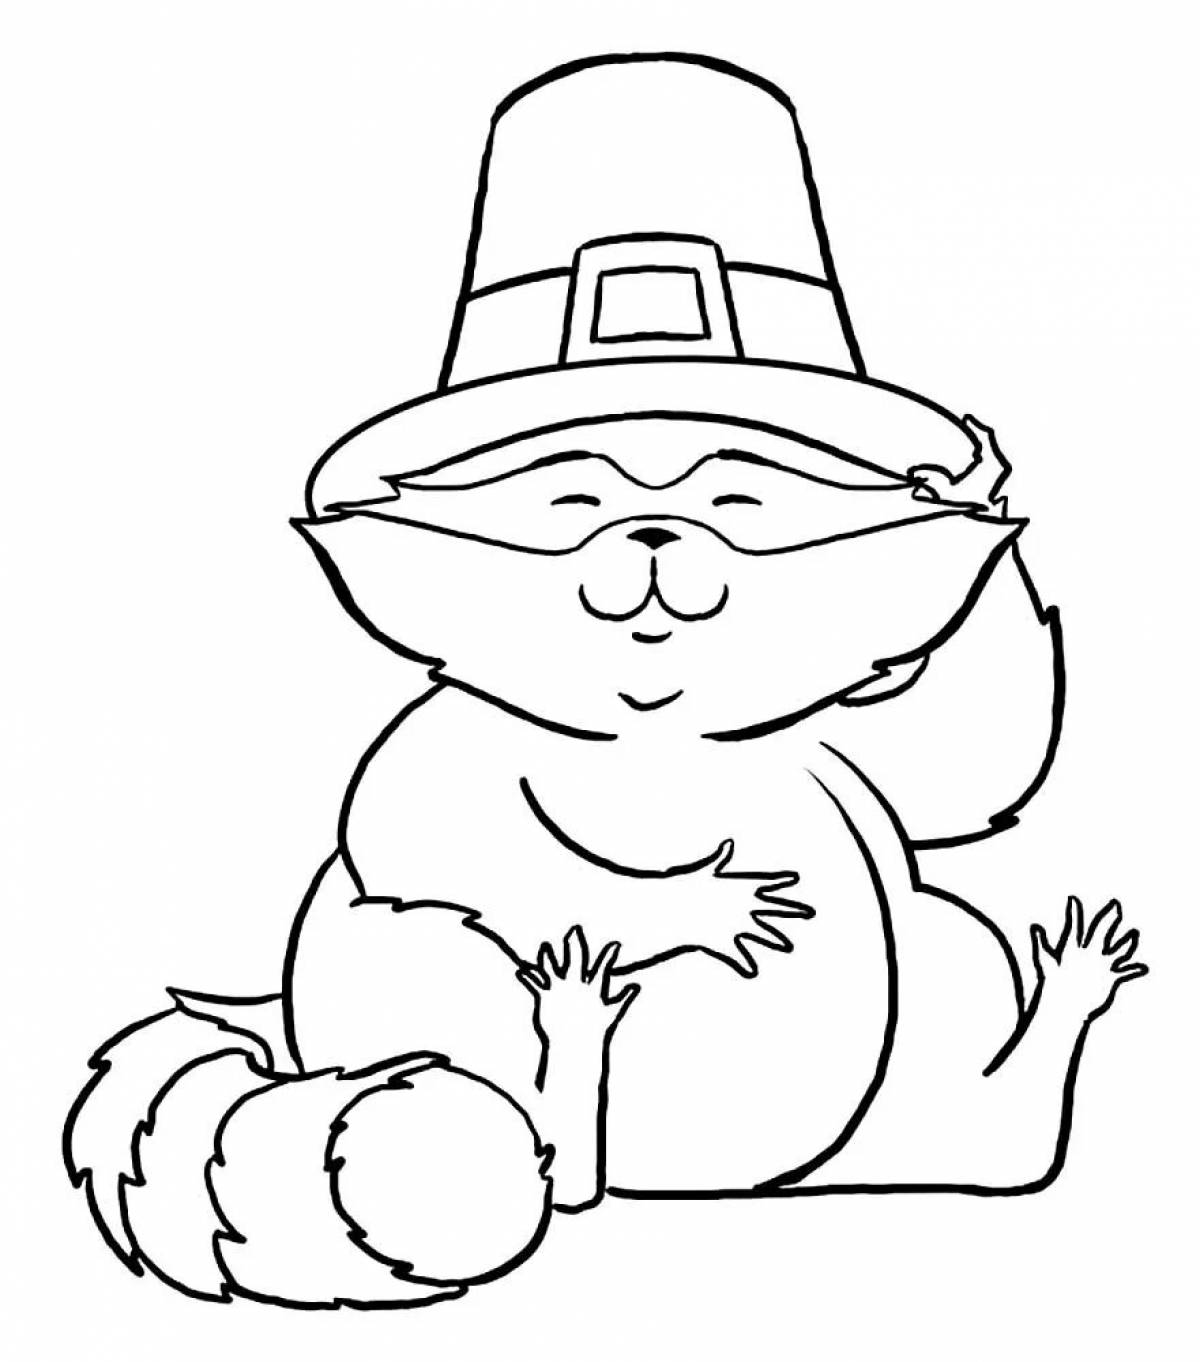 Coloring page exotic cat in a hat